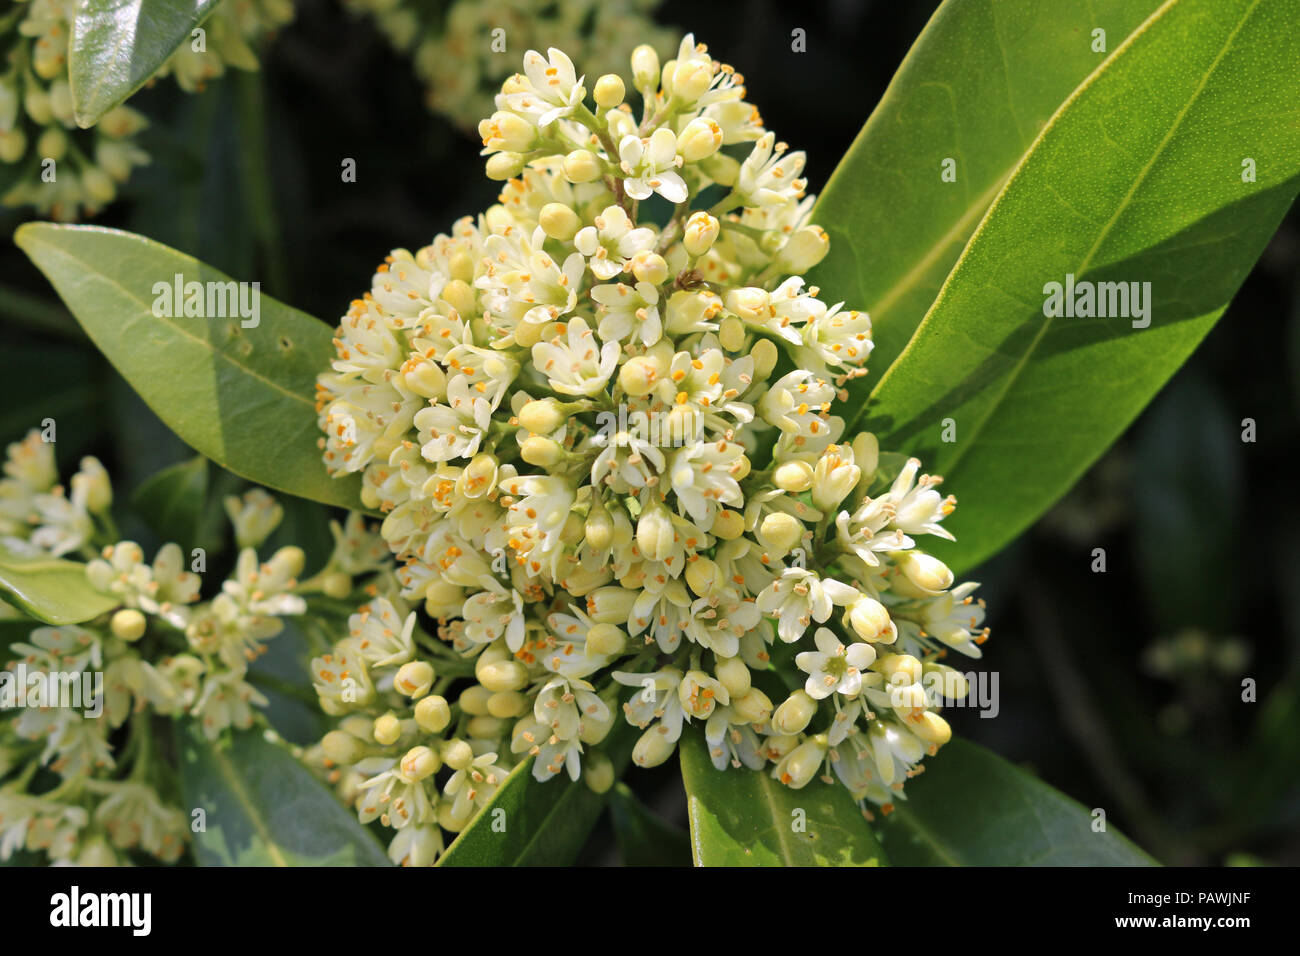 Flowering spike of the Skimmia x confusa Kew Green evergreen plant in full flower with leaves and flowers of the same plant in the background. Stock Photo